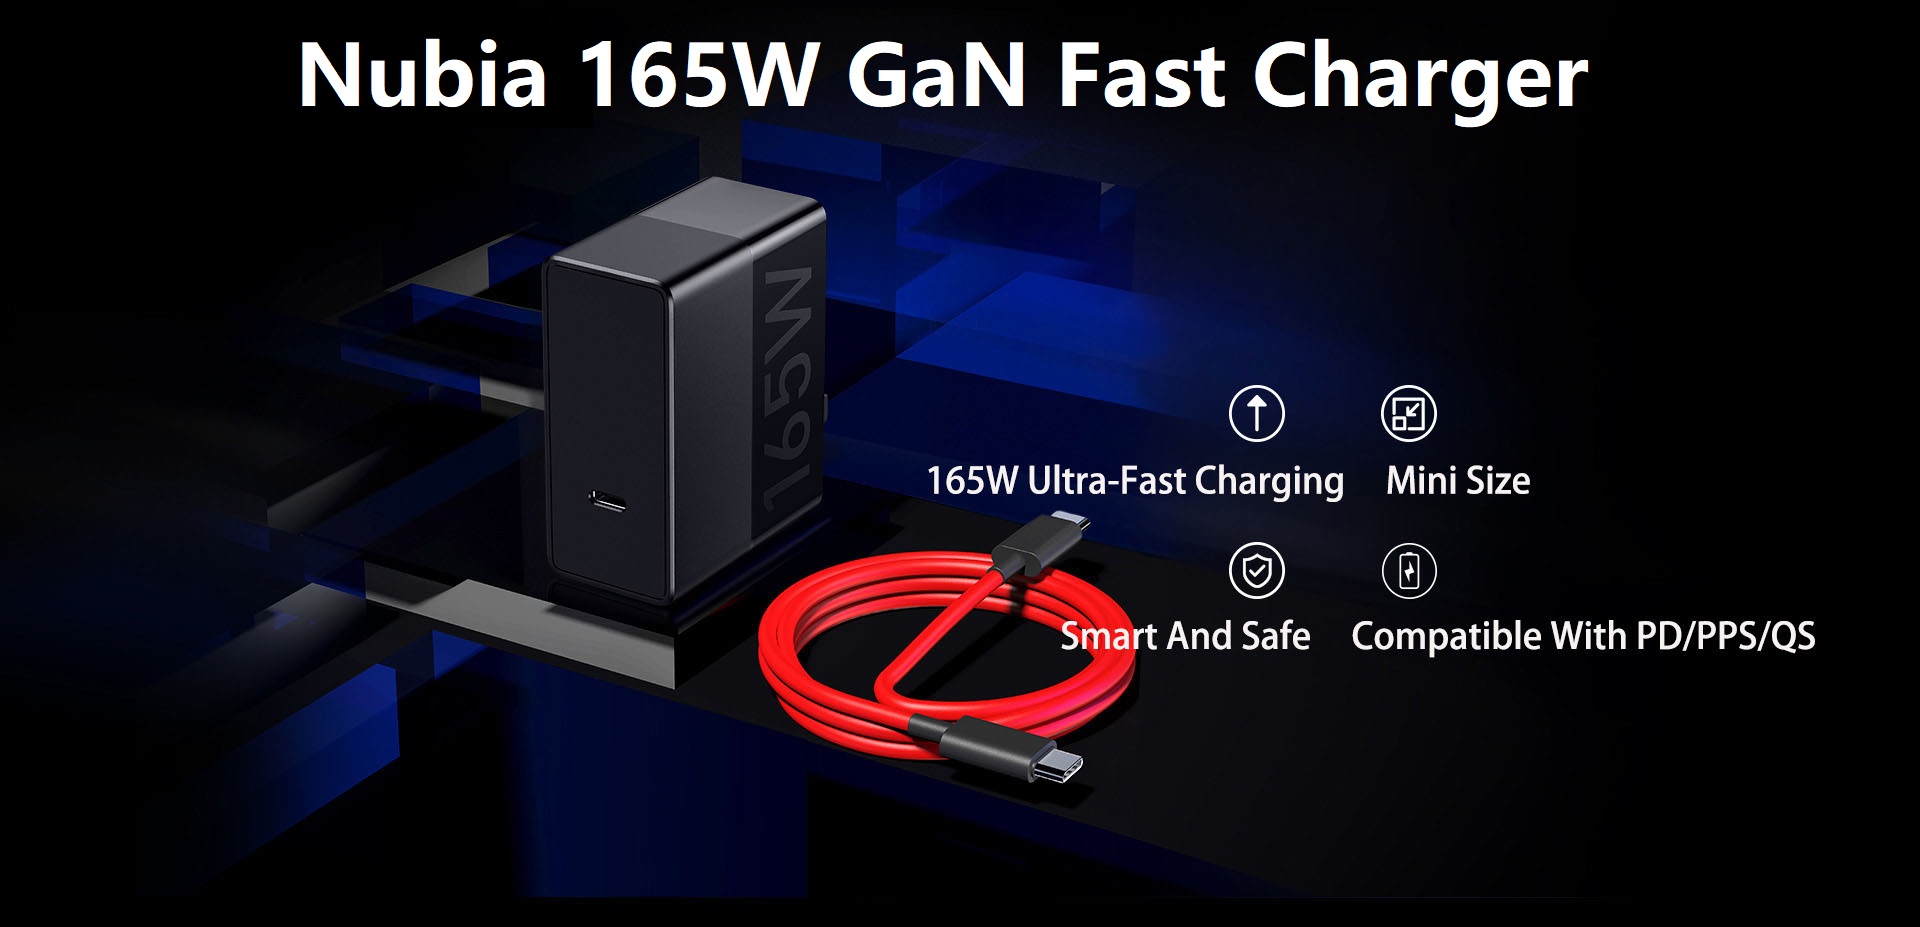 Nubia 165W GaN Fast Charger